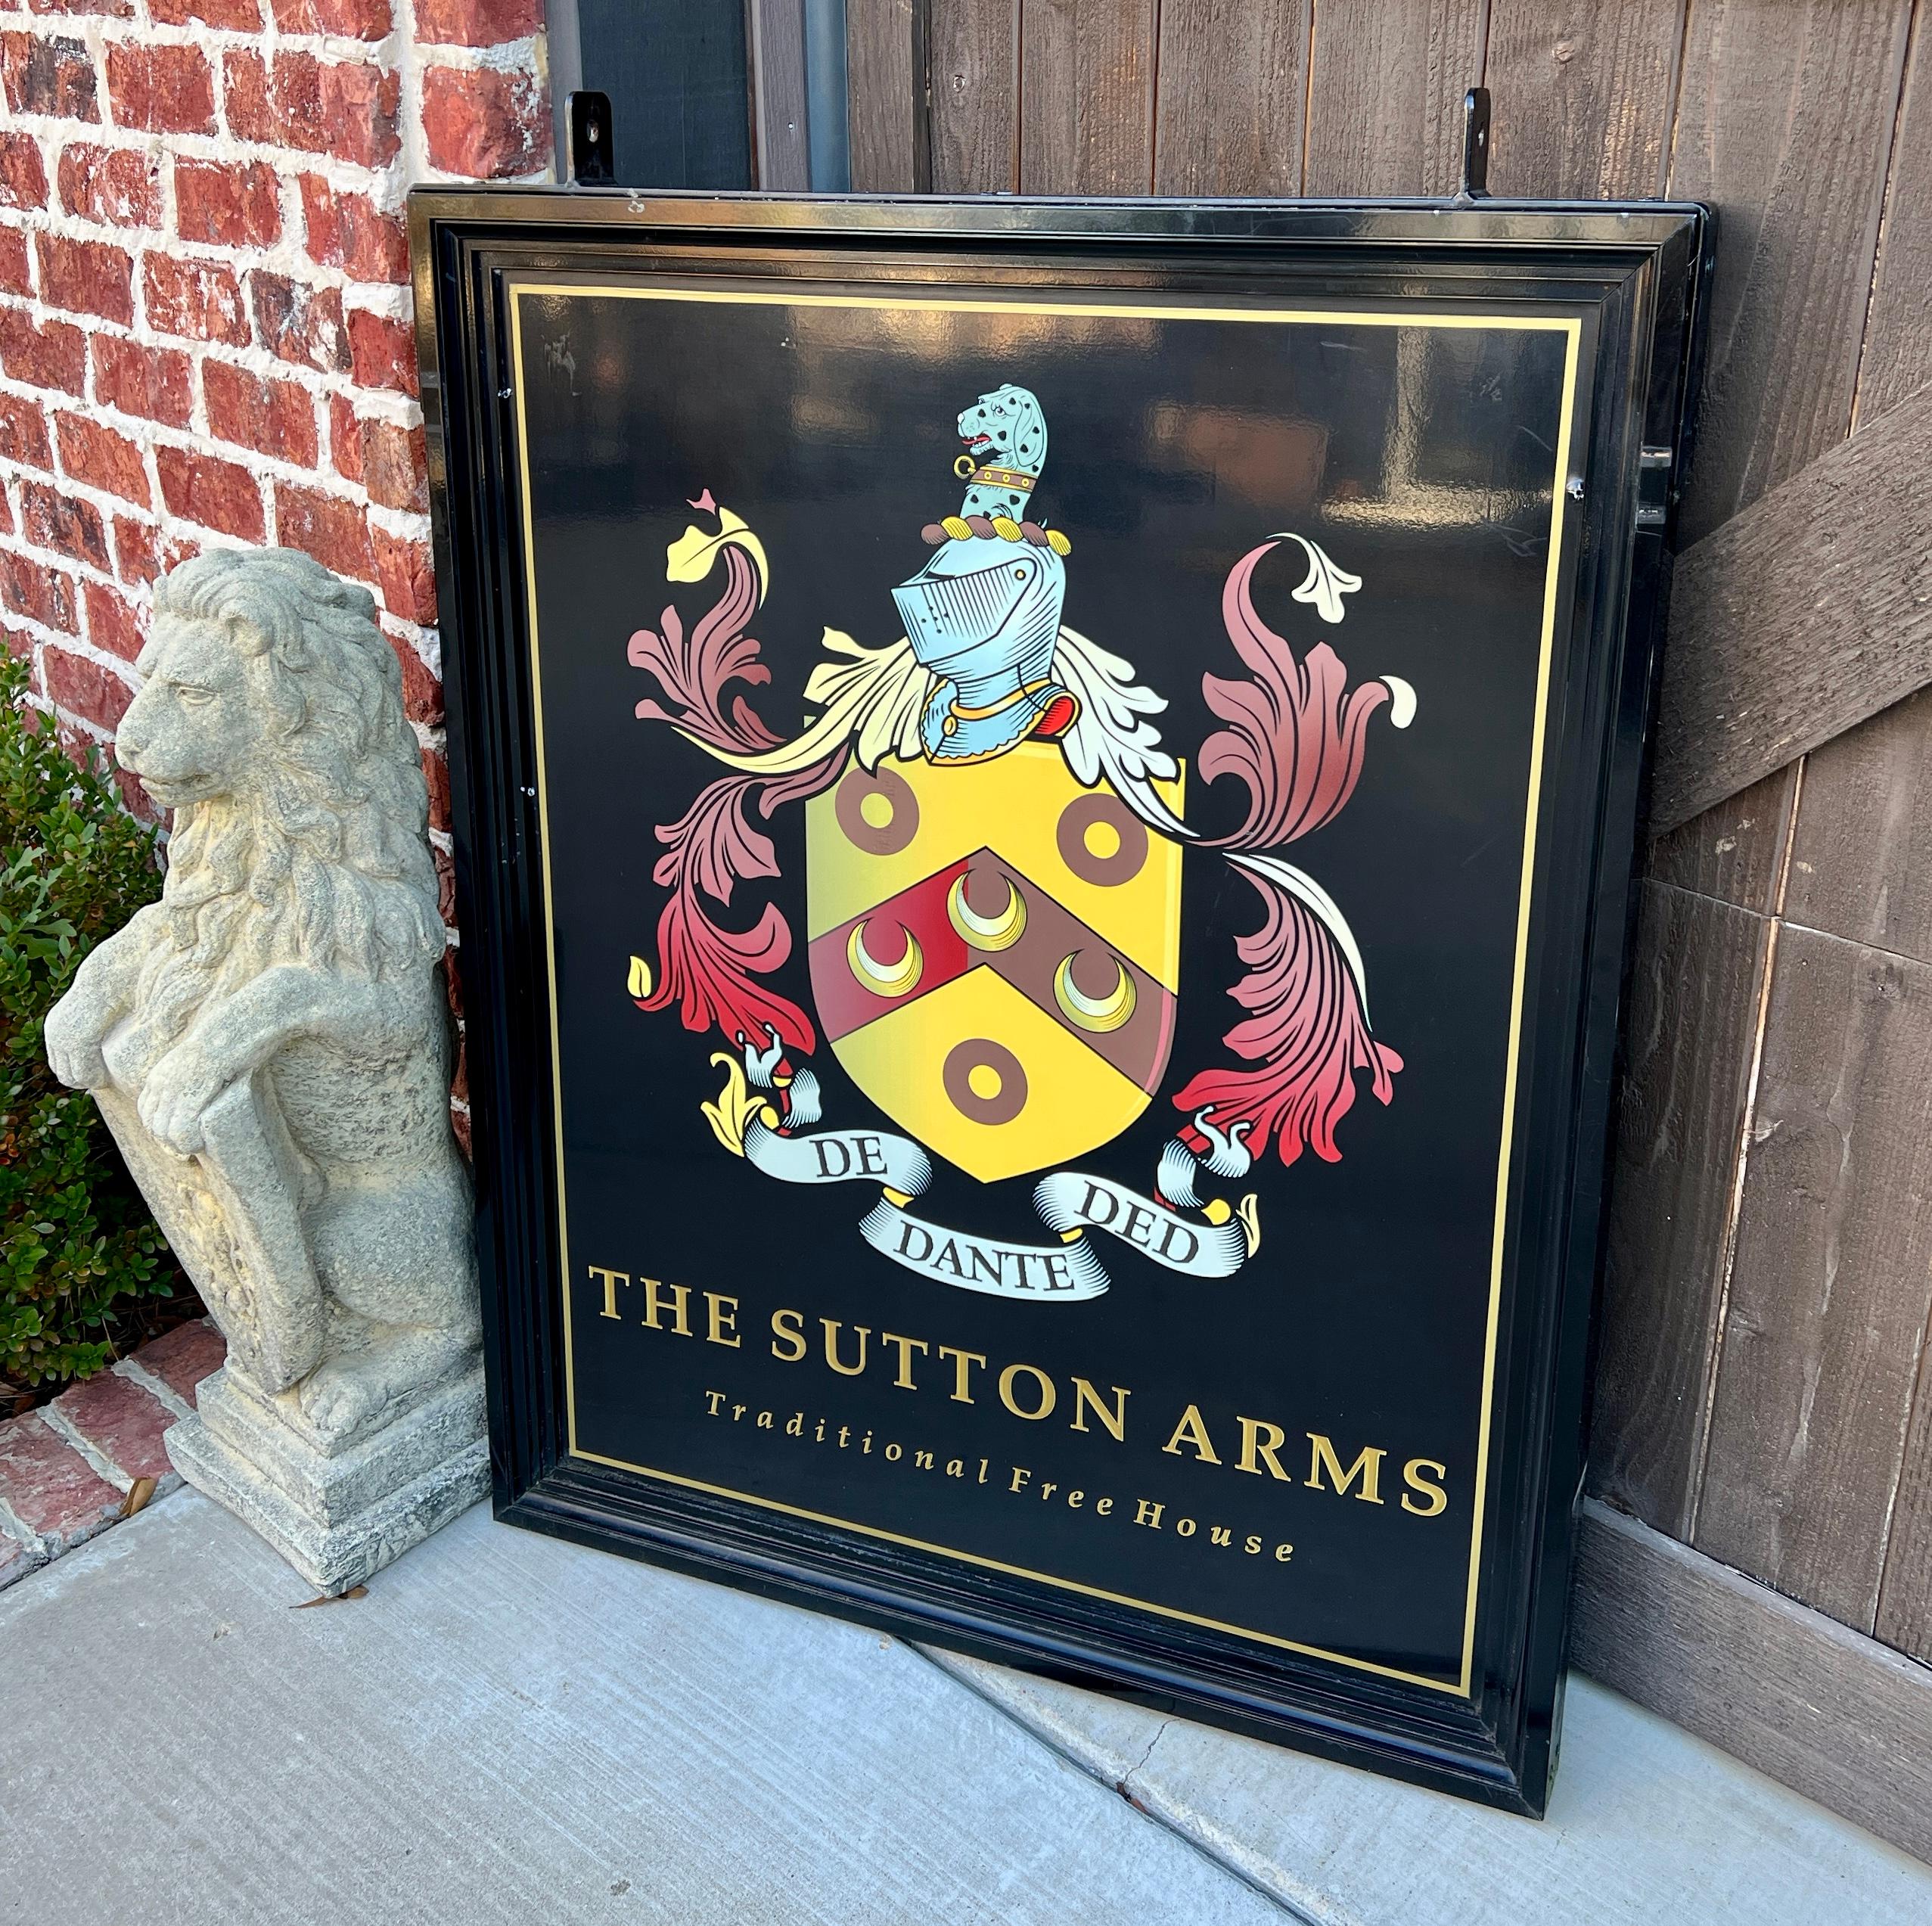 20th Century Vintage English Pub Sign Metal Double Sided Sutton Arms Traditional Free House For Sale